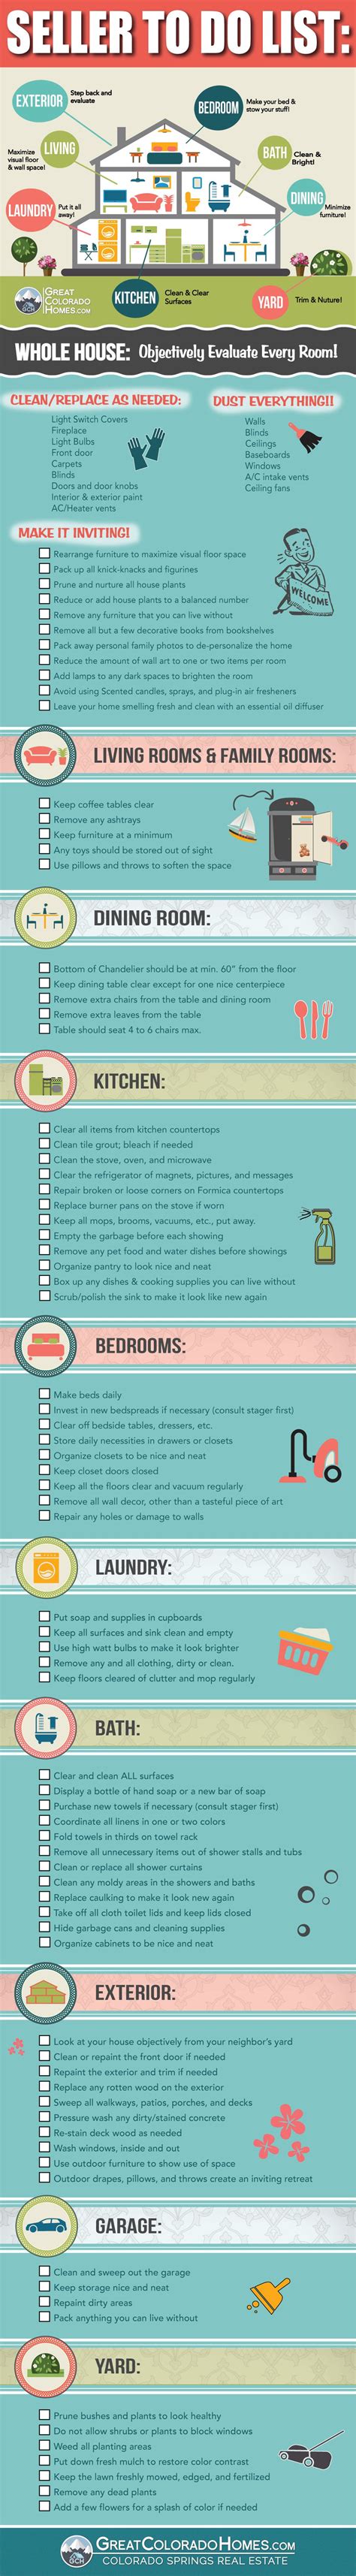 Home Seller To Do List Infographic Real Estate Business Real Estate